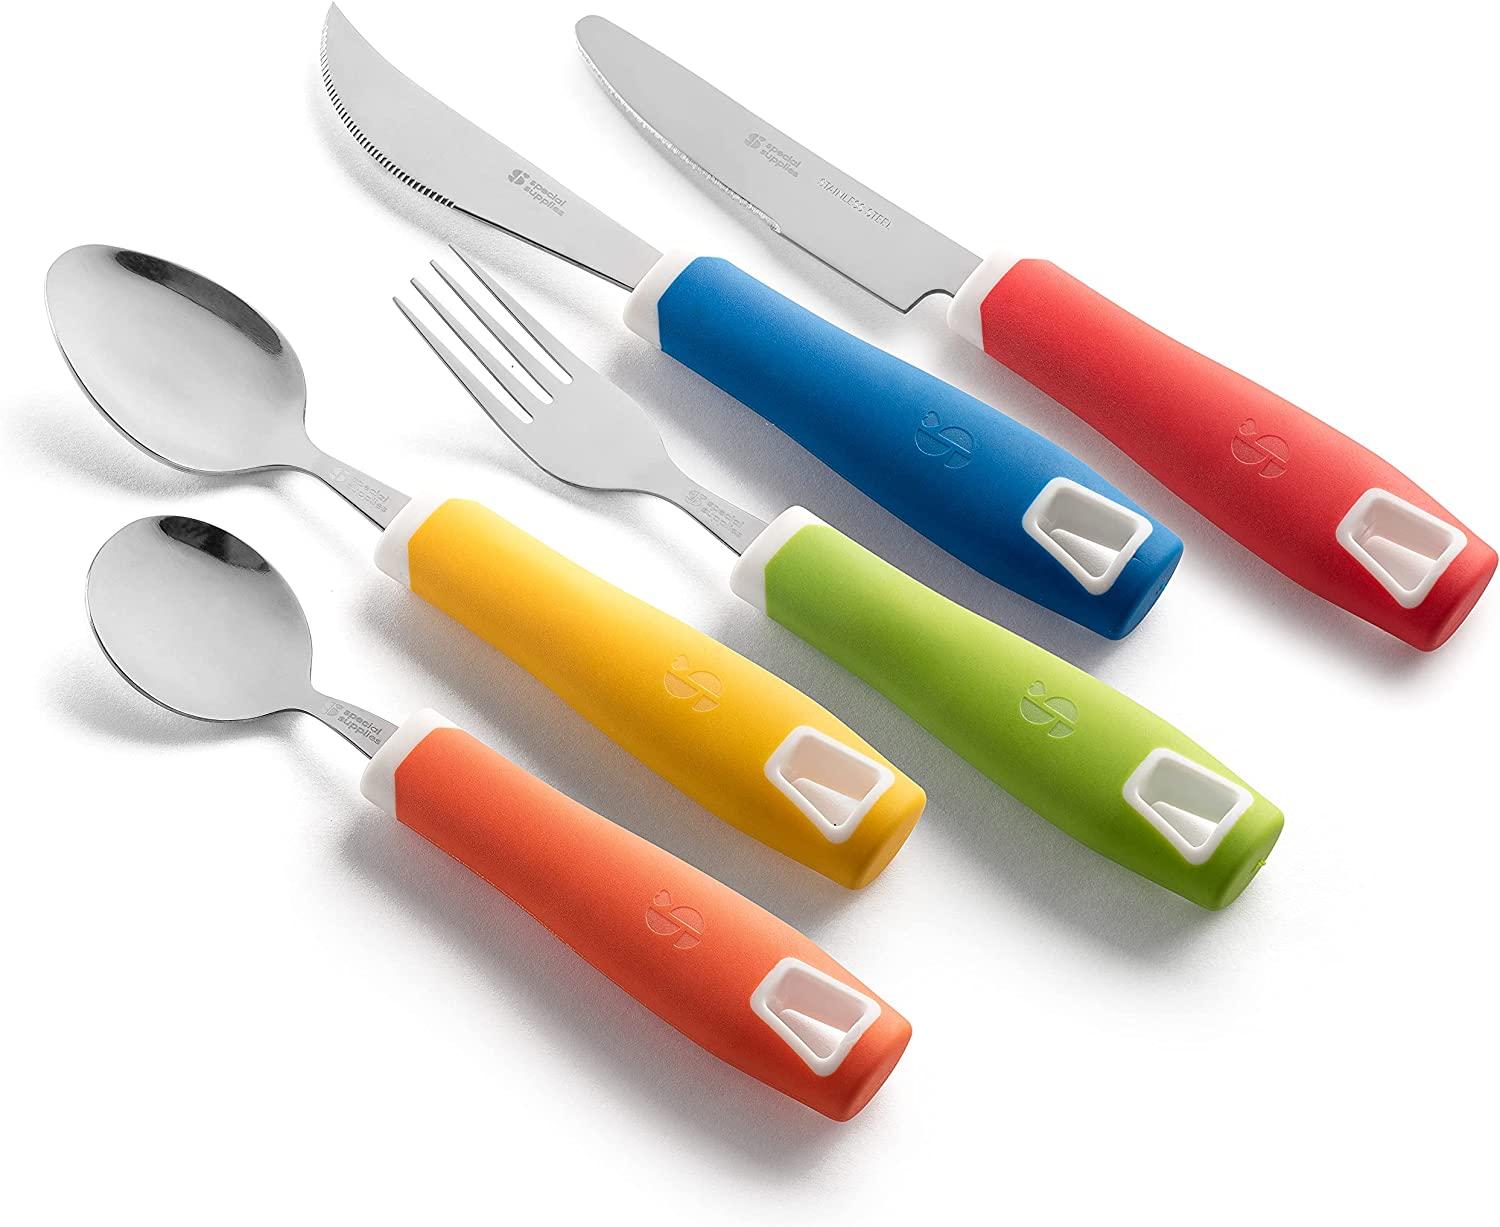 Easy to Hold Utensils- Knife Fork and Spoon Set- Red